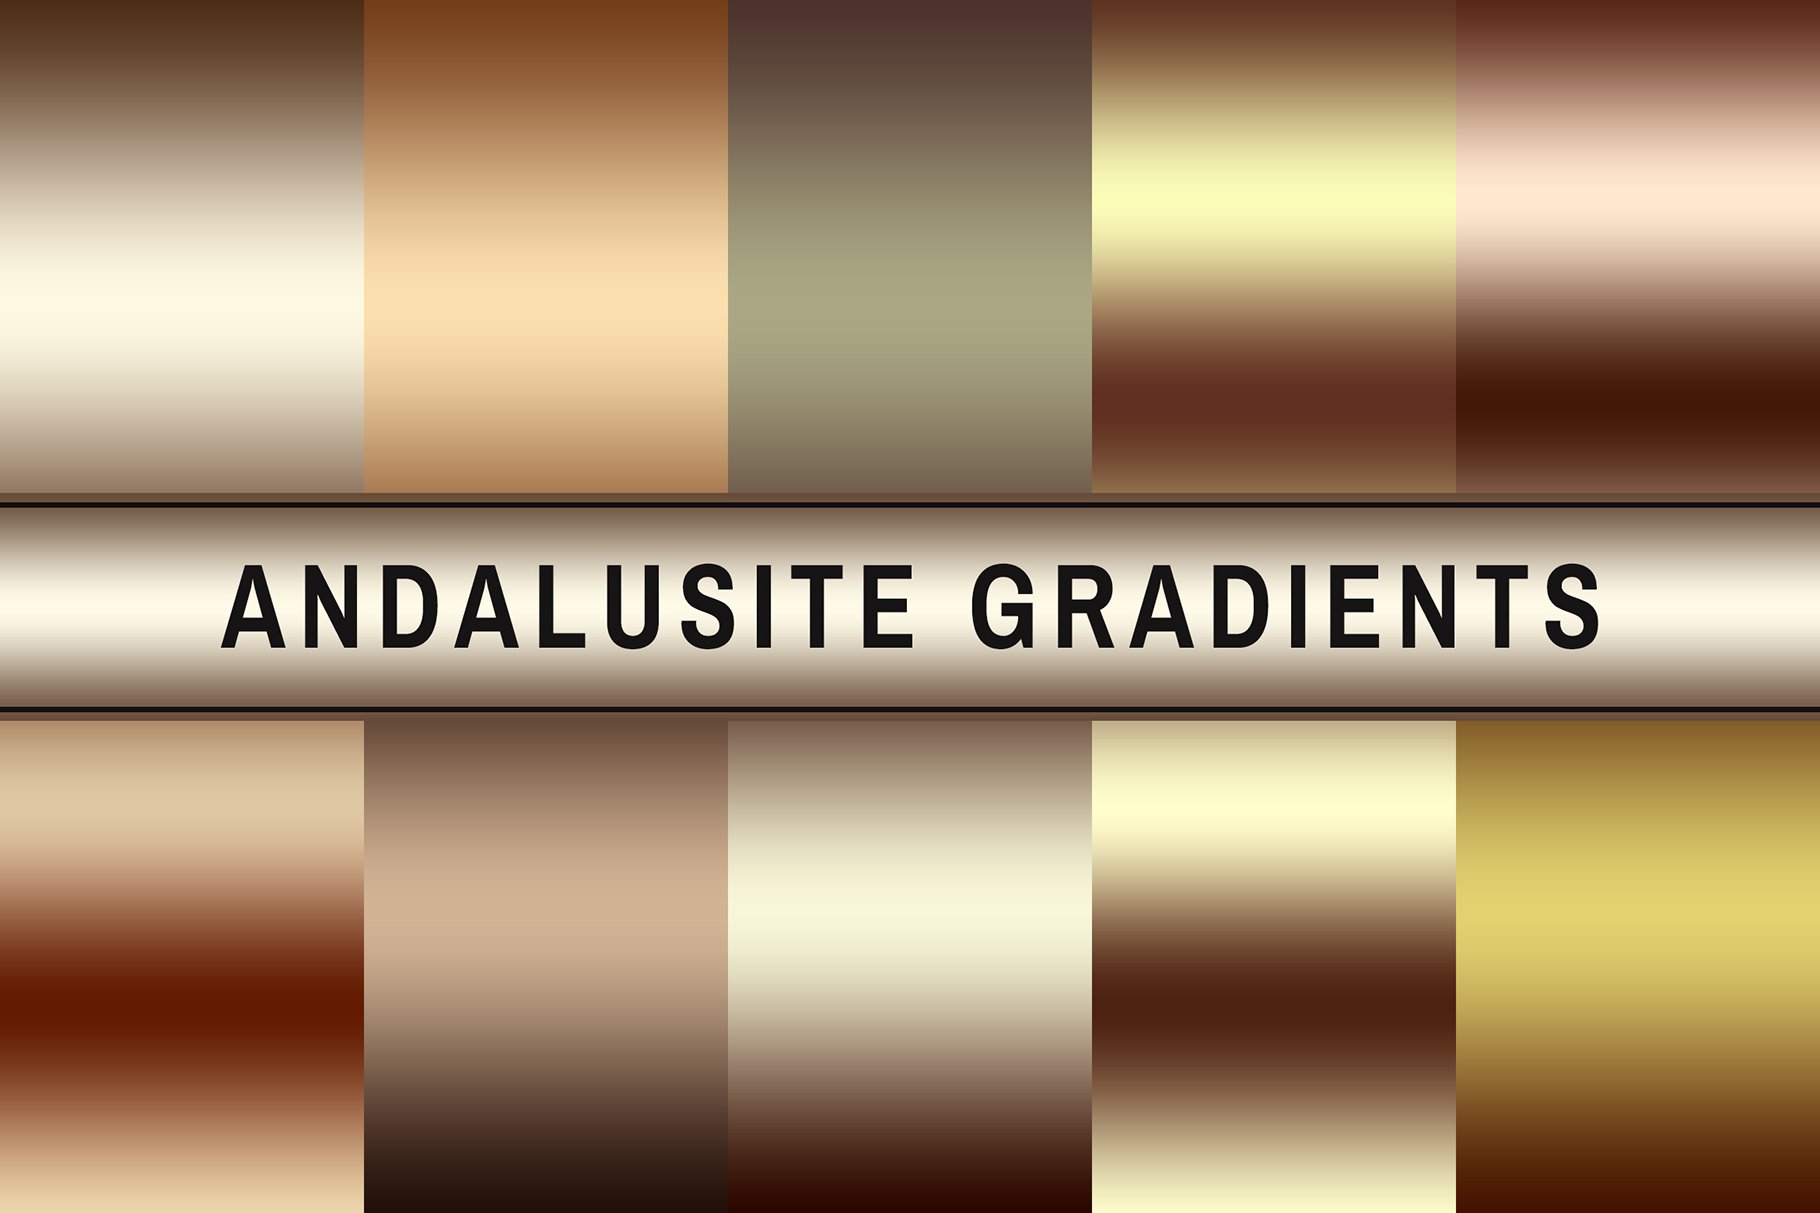 Andalusite Gradientscover image.